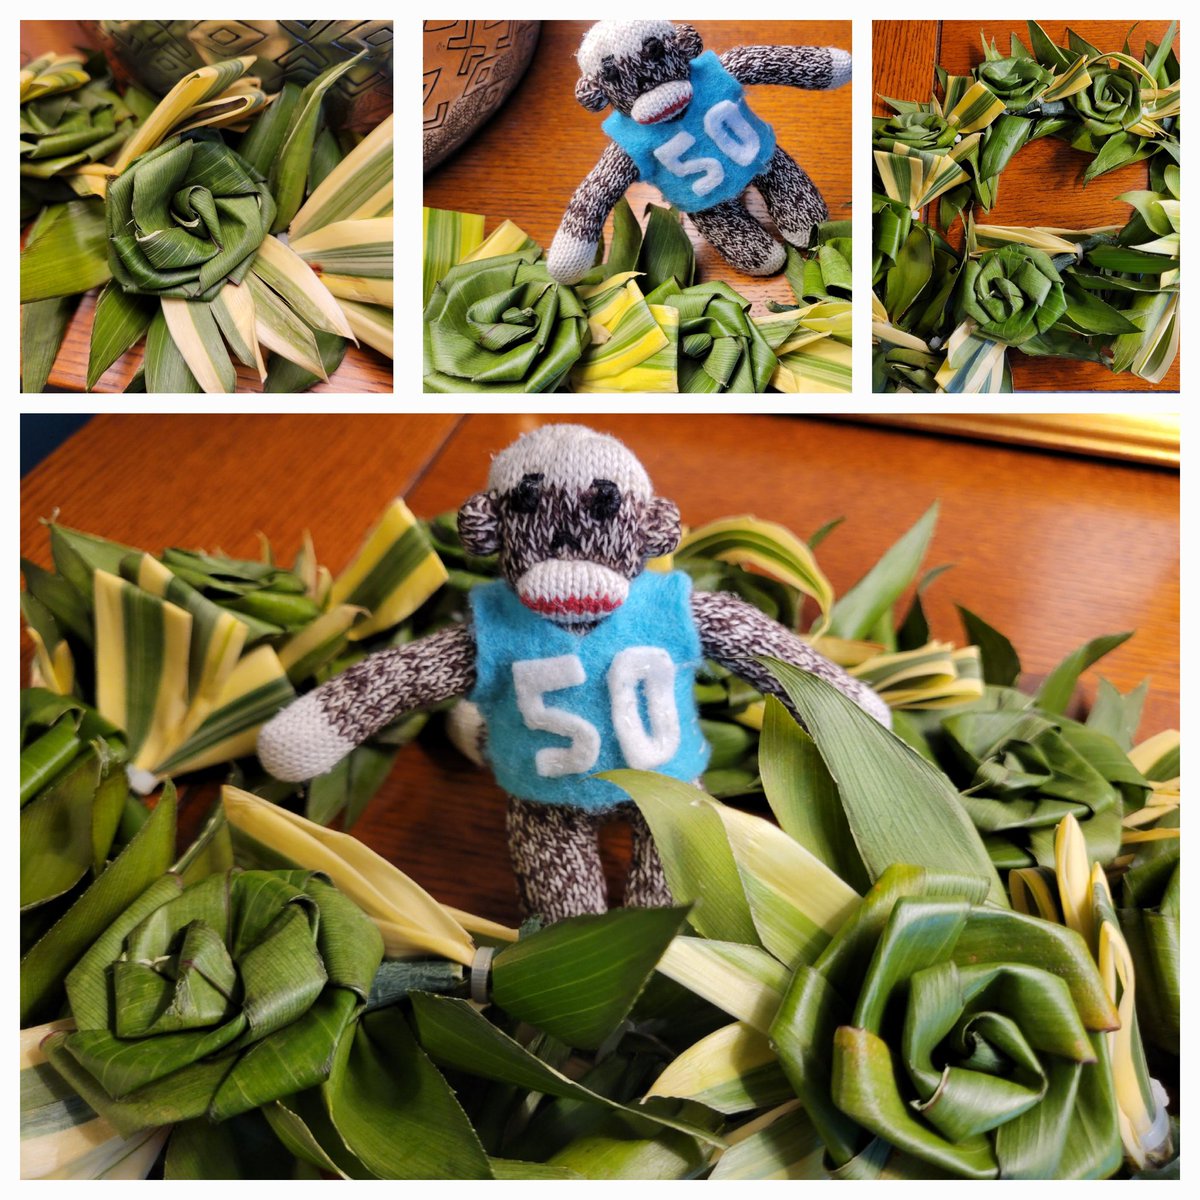 Look it! A beautiful Ti leaf lei that hoom received when visiting colleagues in Hawaii. This one is exquisite-- rose buds woven into the long 6ft+ lei. Gawl. Extraordinary honor. #chillinwithTM2 #TM2Verified ✅️ 🐒